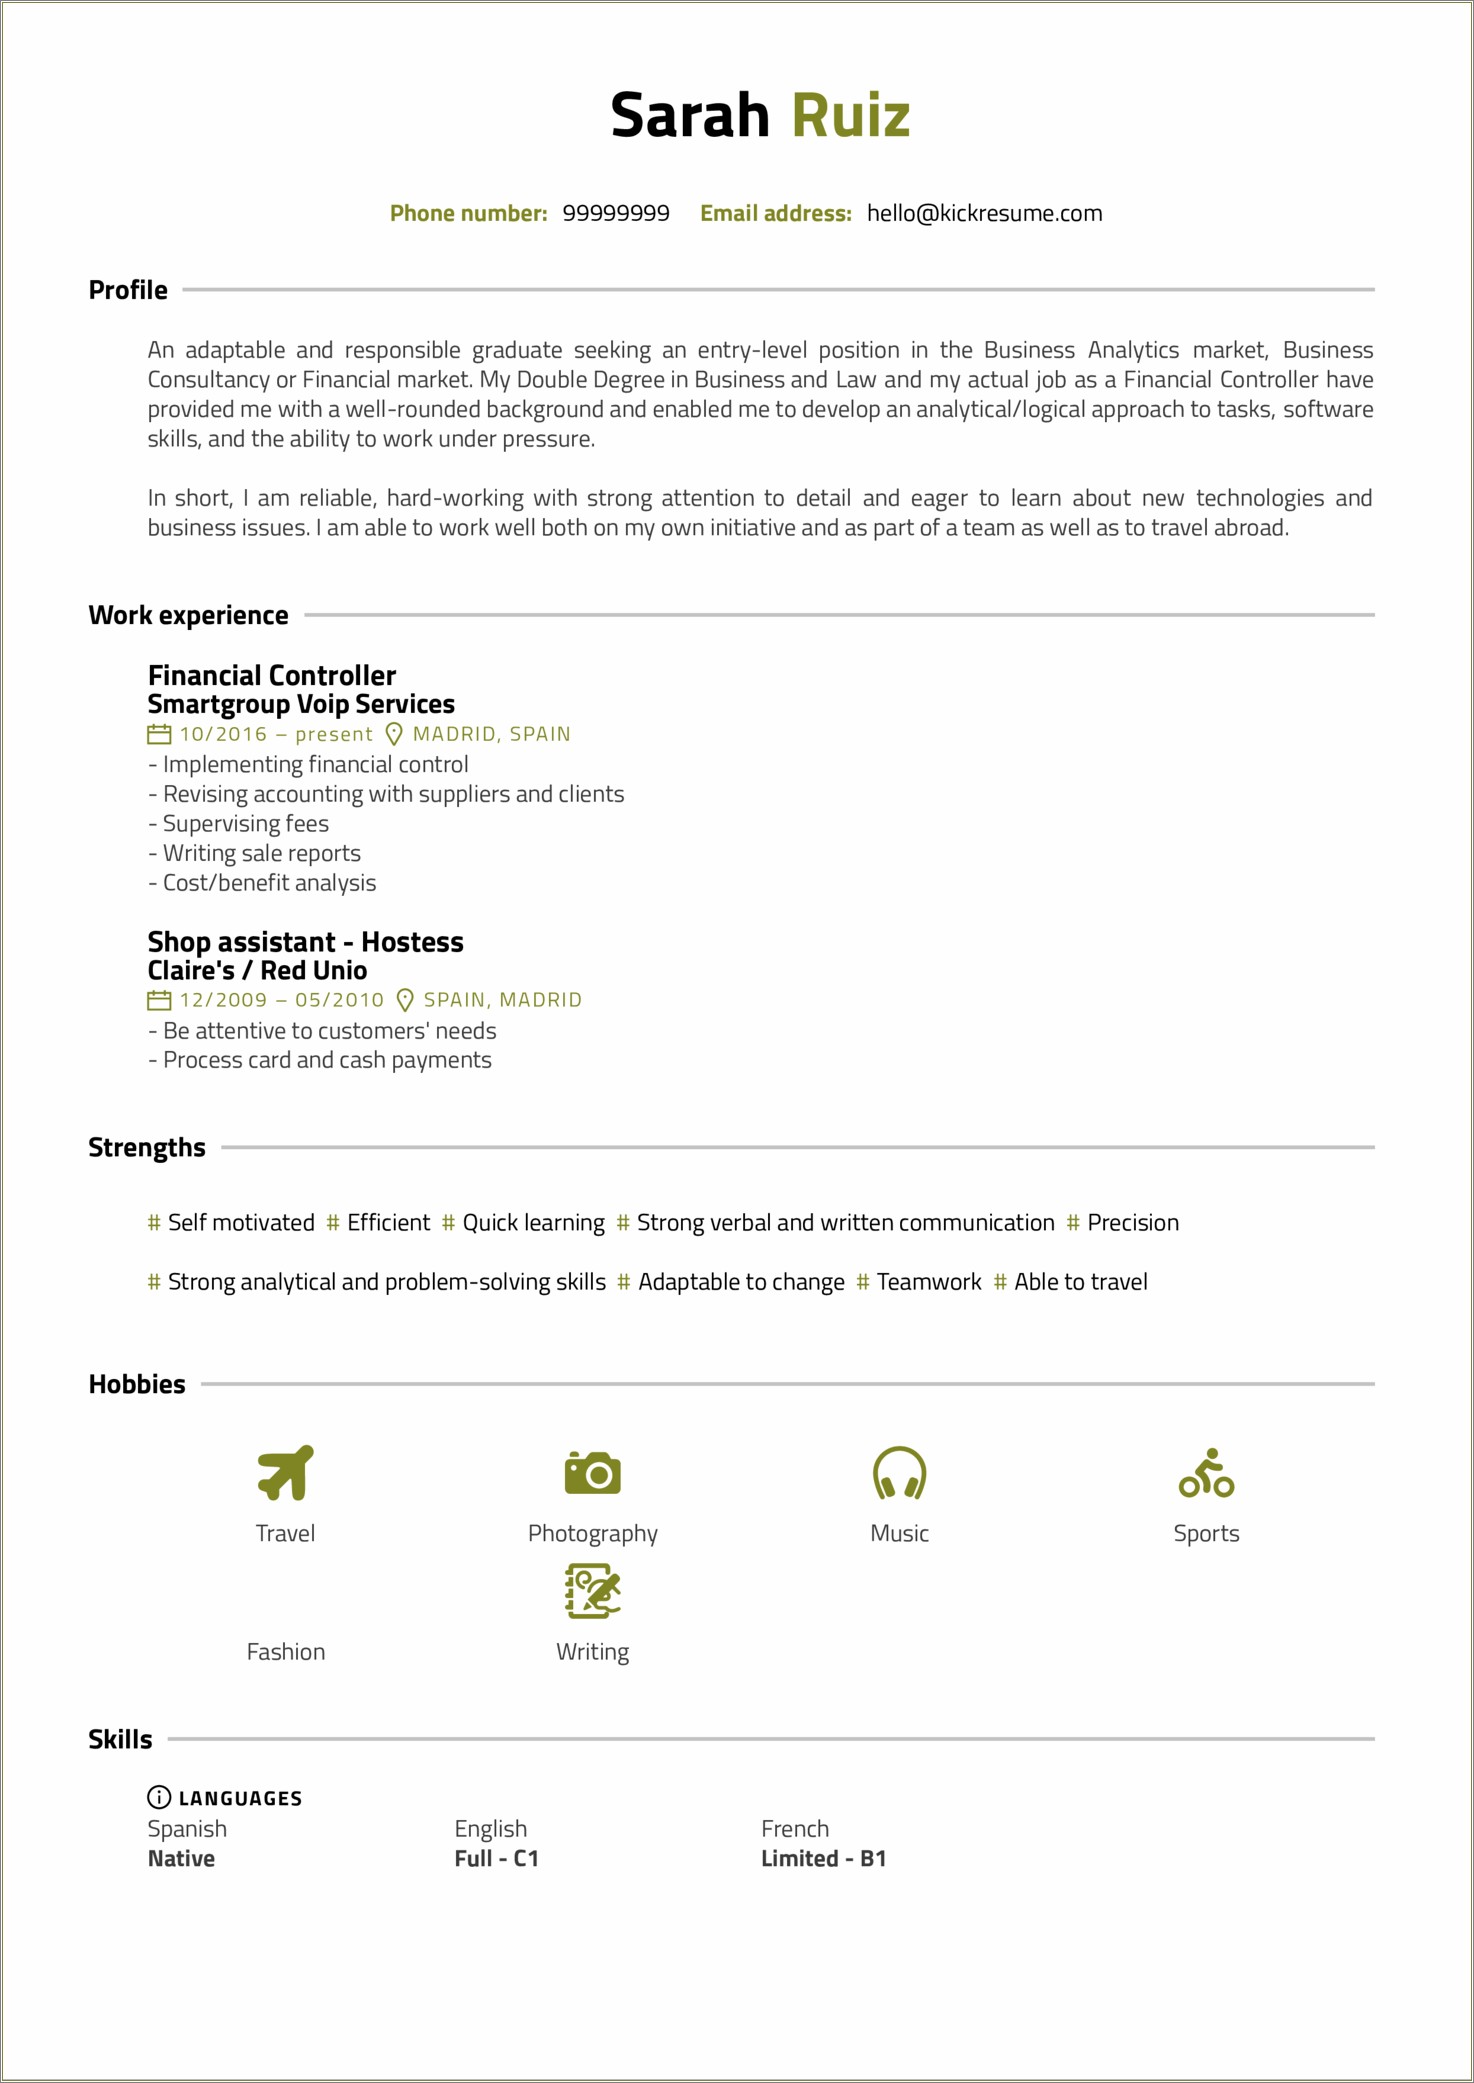 Resume Format For Job Application Abroad